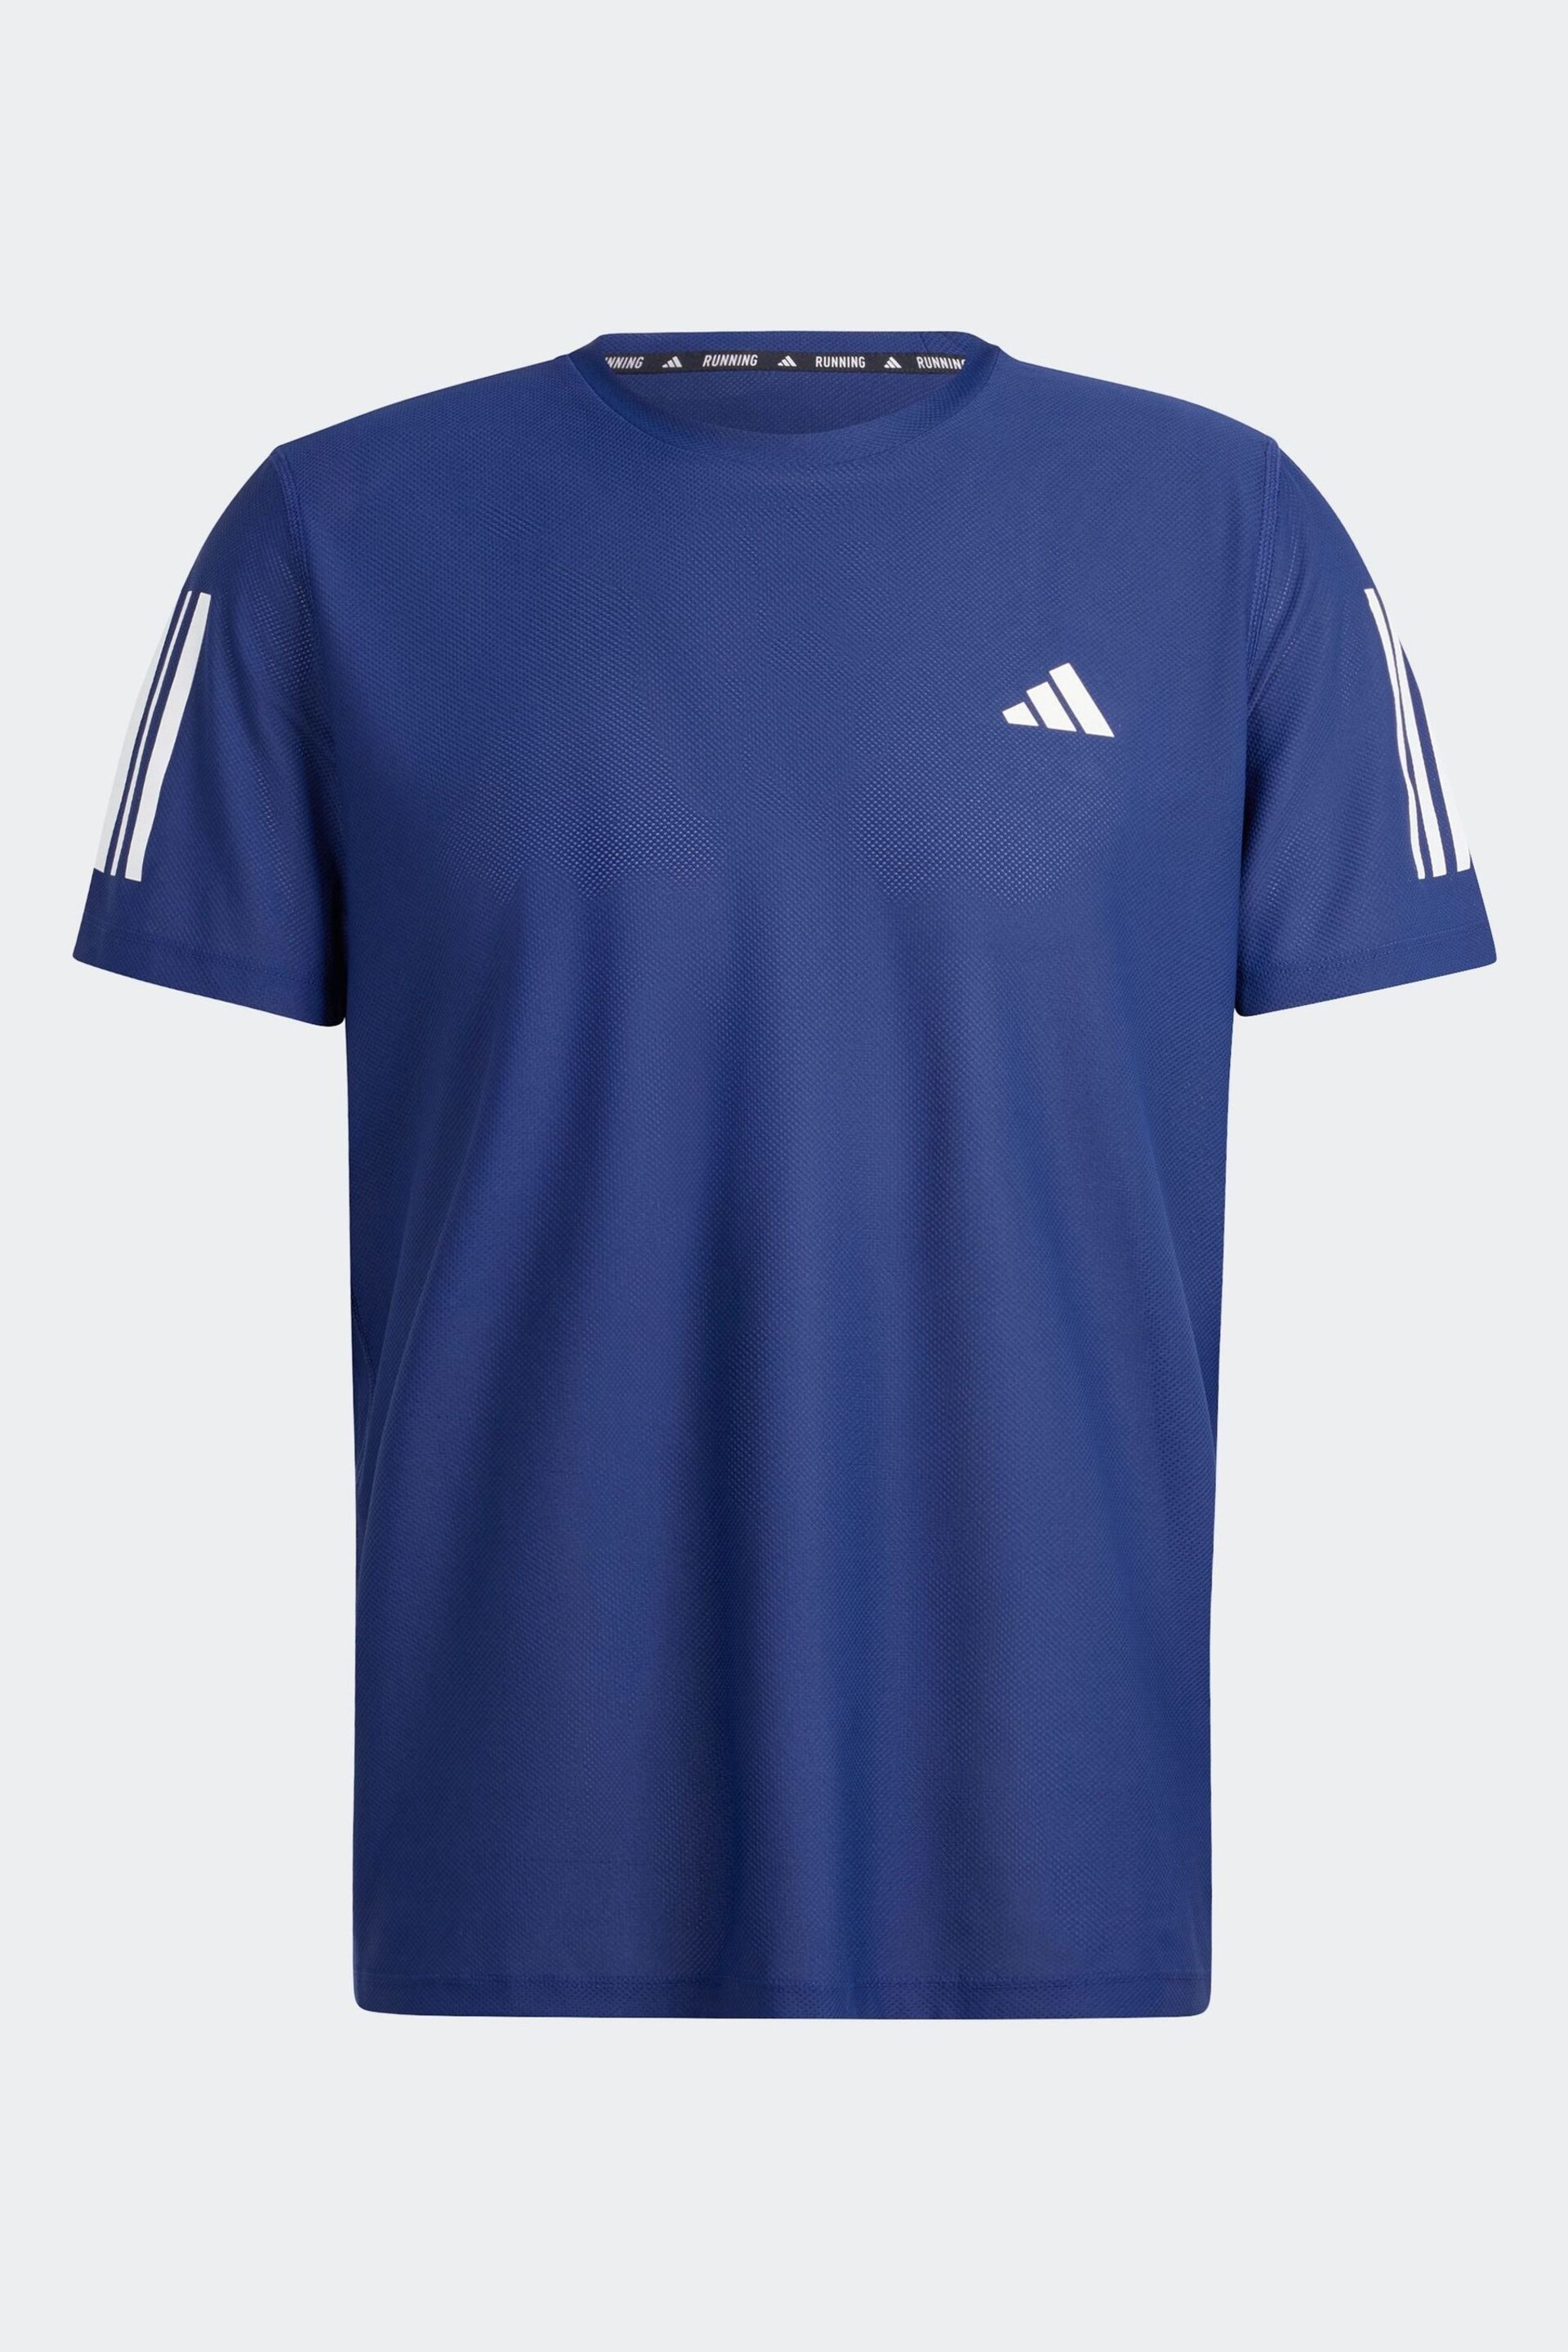 adidas Blue Own the Run T-Shirt - Image 7 of 7